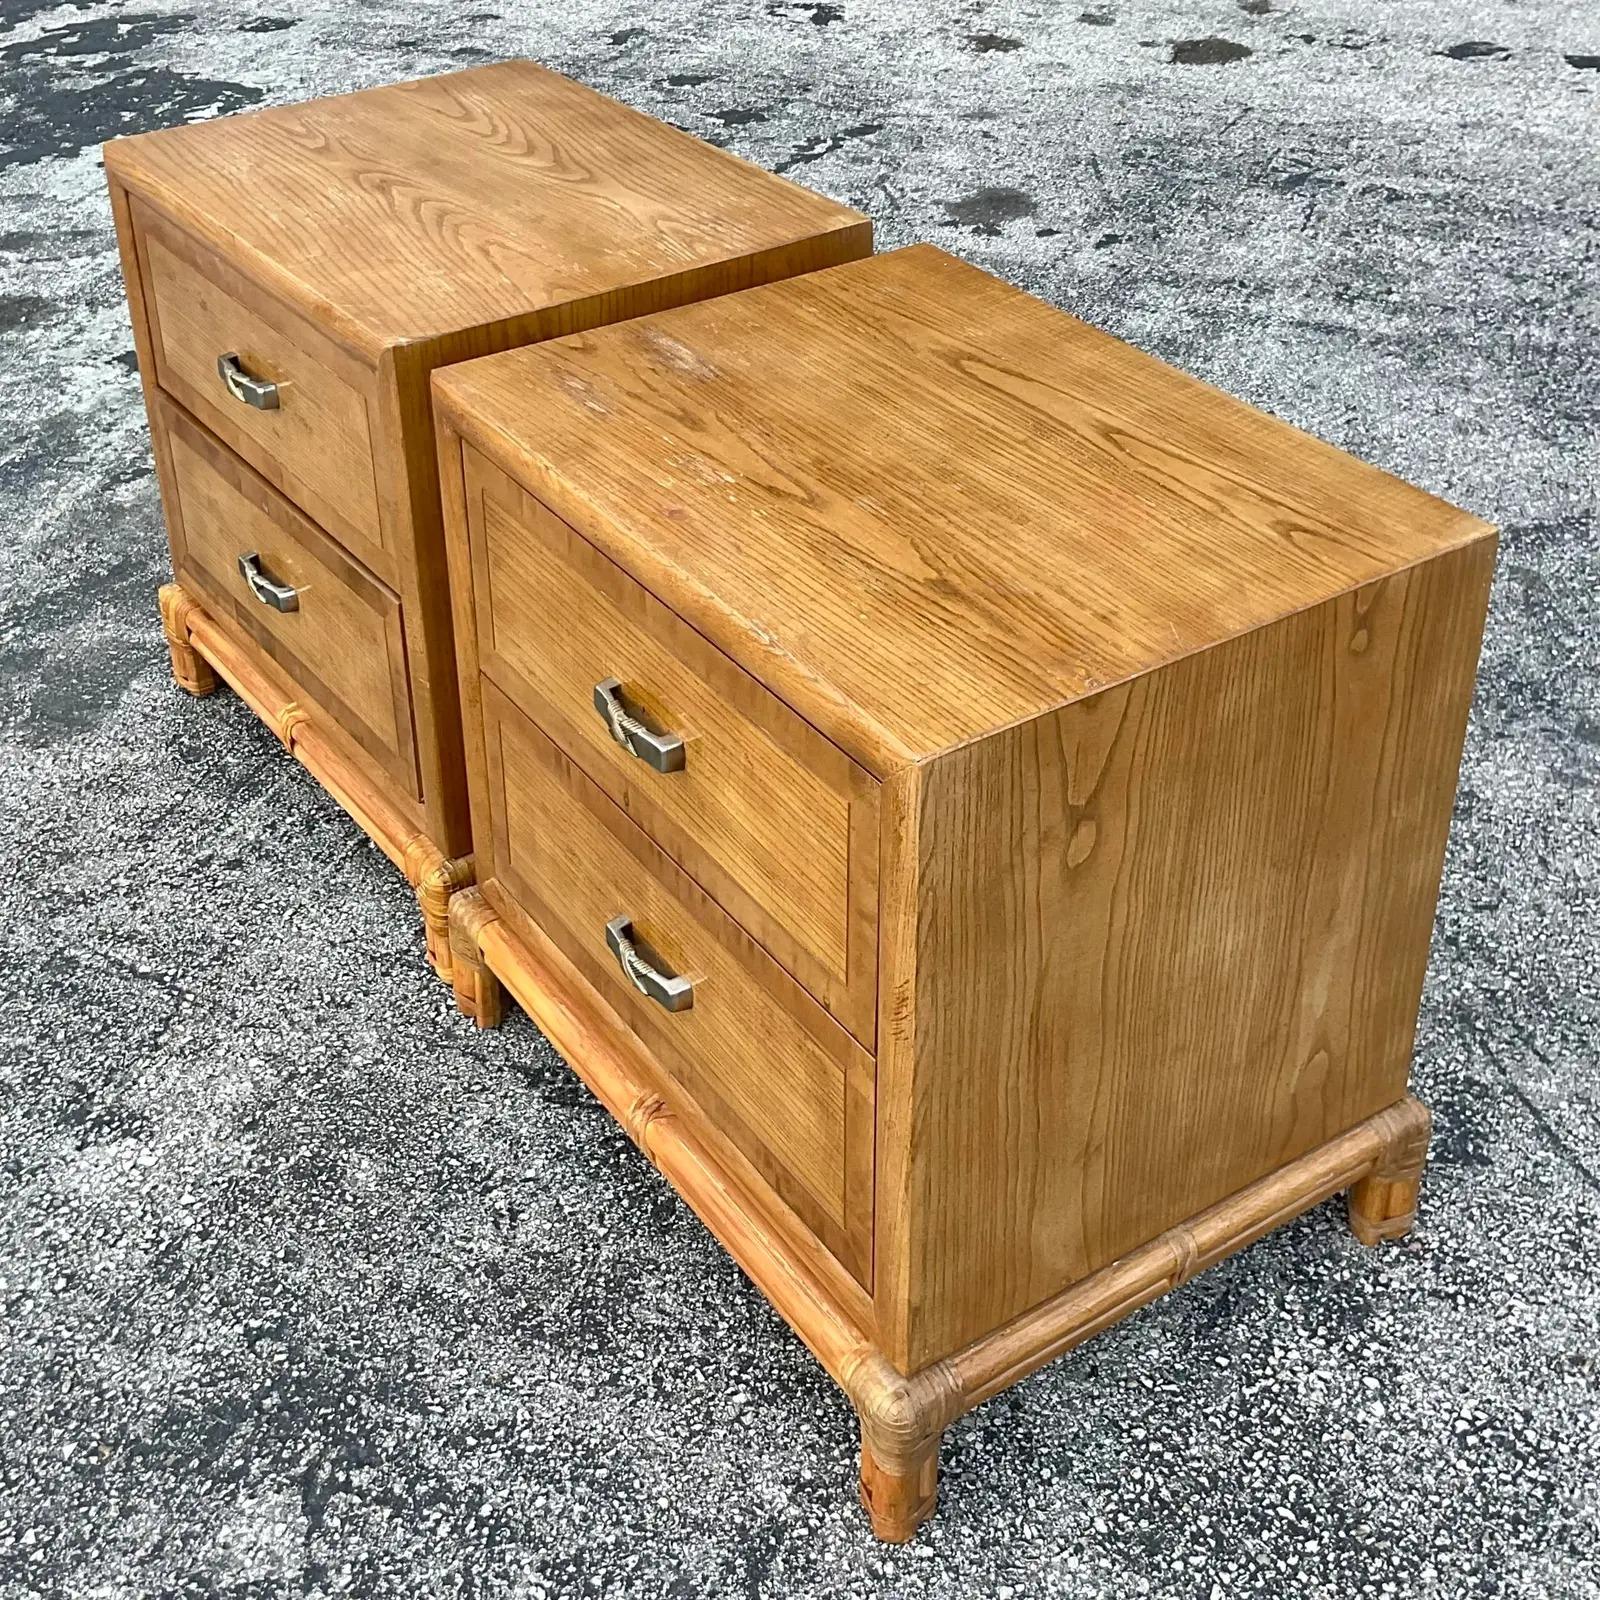 A fabulous pair of vintage Coastal nightstands. Made by the iconic Henredon group and part of their coveted Circa East collection. Matching pieces also available. Acquired from a palm Beach estate.